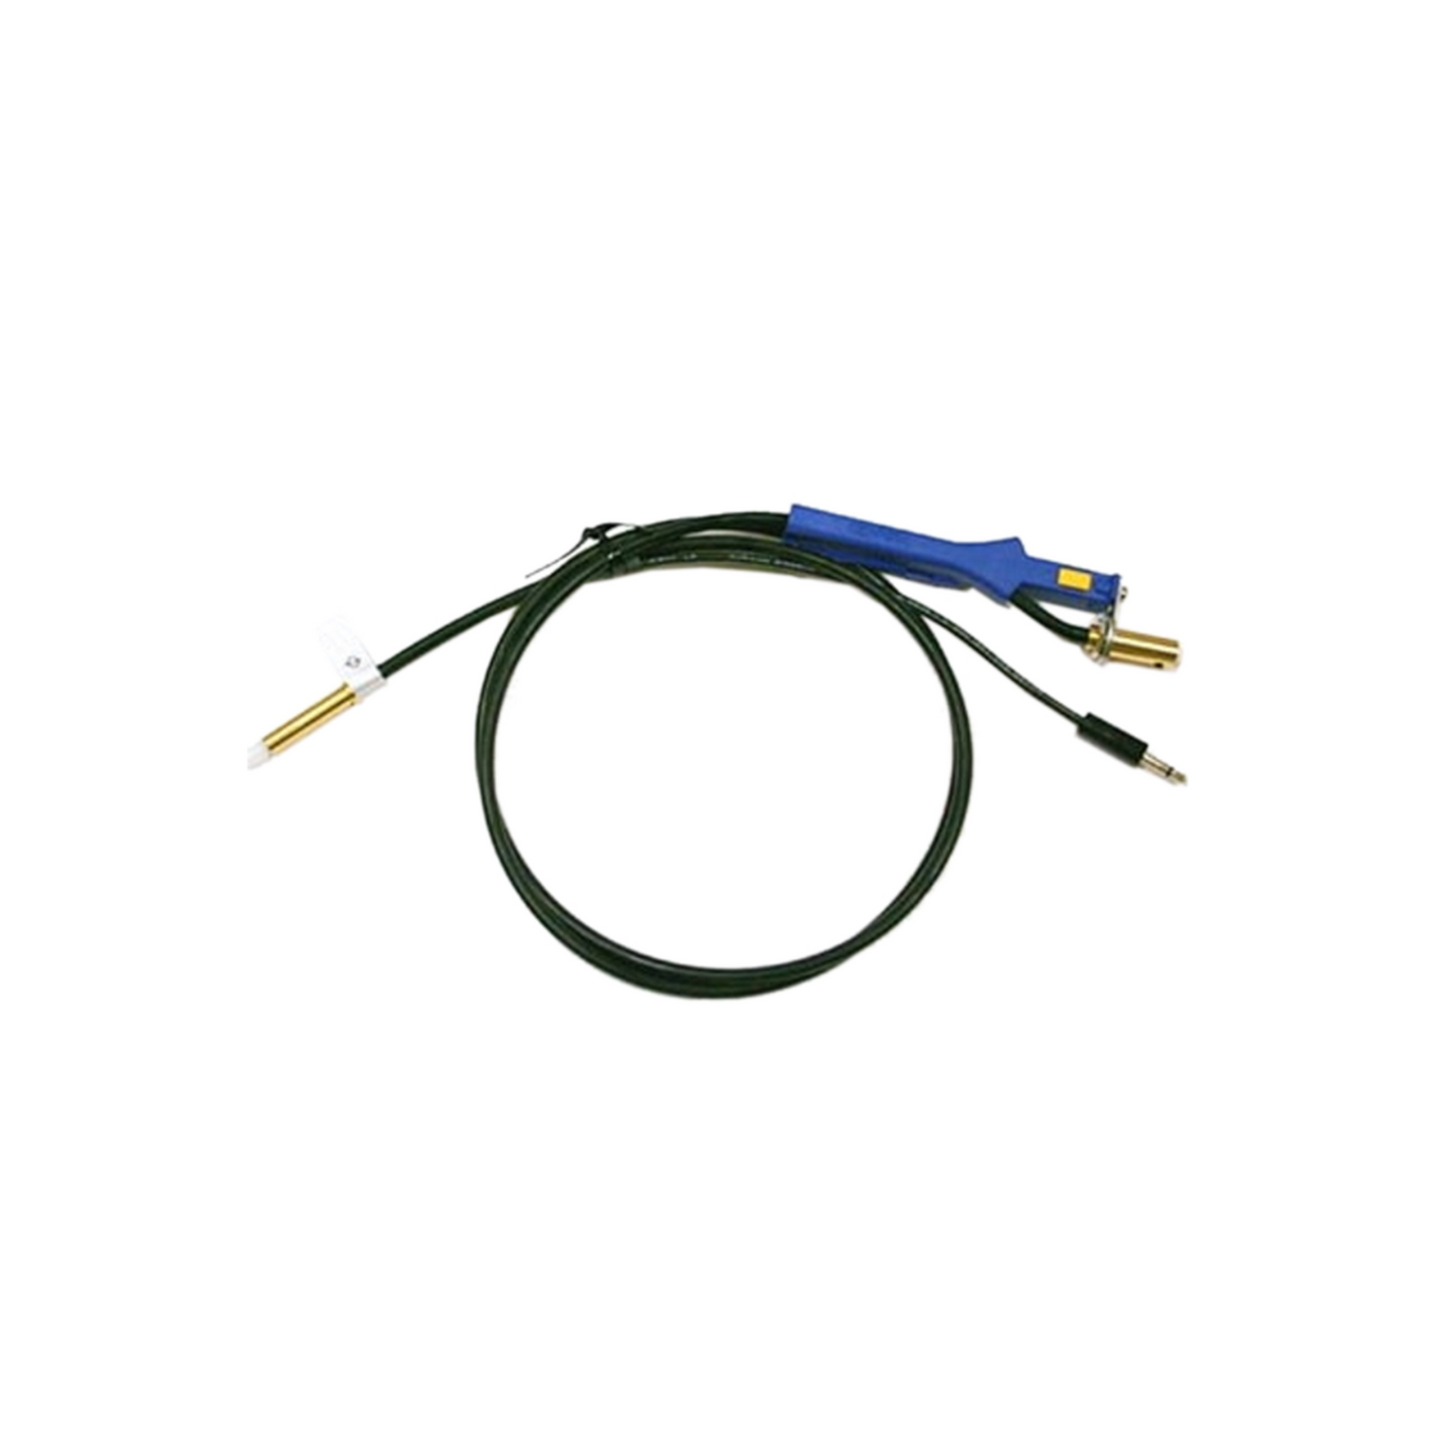 Hakko Products_ B3477 Tube Assembly M 0.6mm-1.0mm with Switch_ Soldering Accessories_ Hakko Products